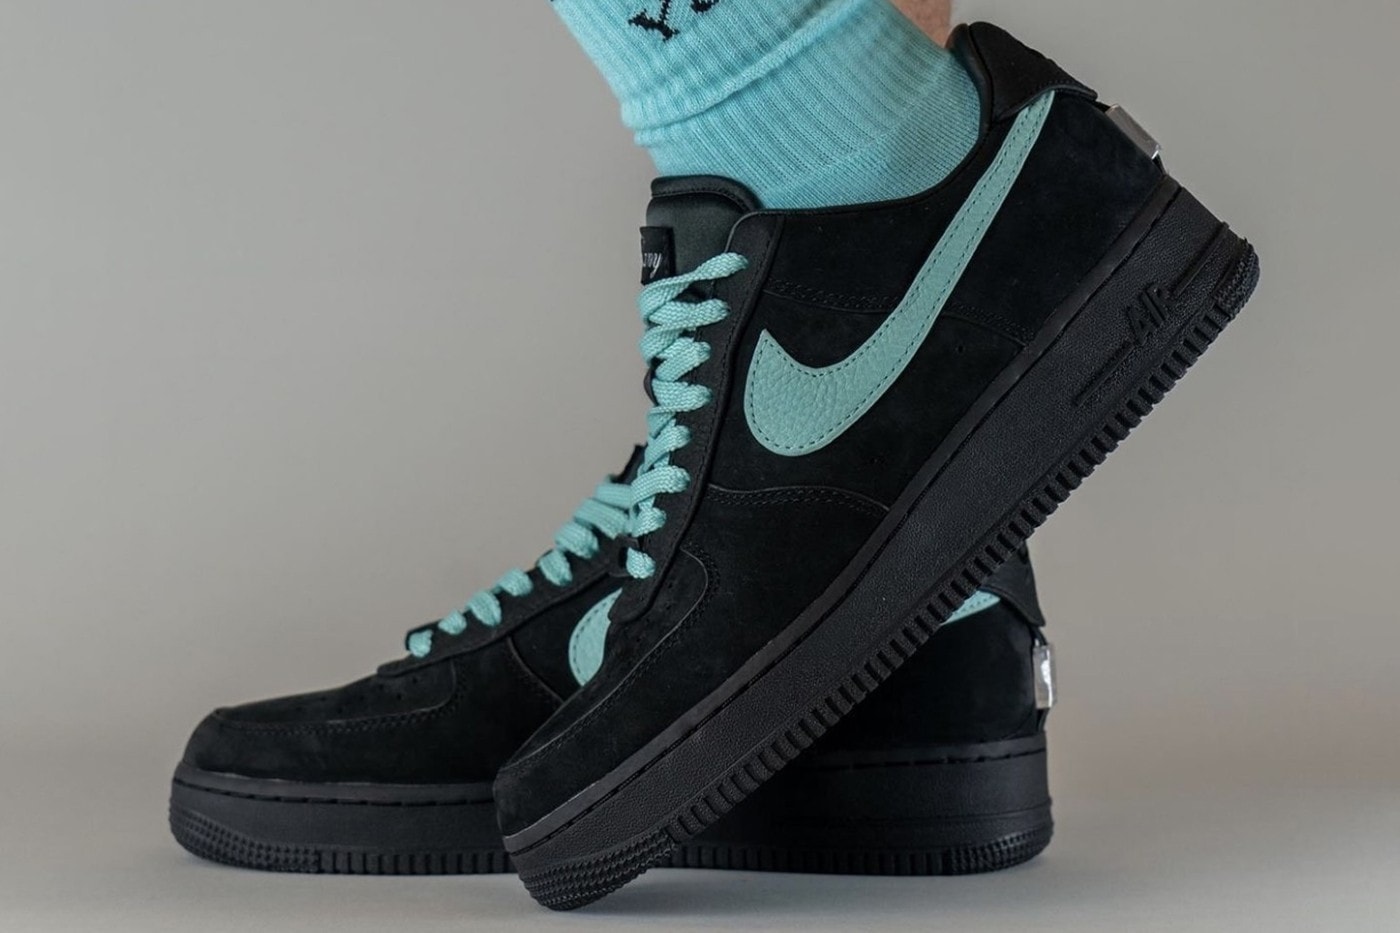 Tiffany & Co. x Nike Air Force 1 Low collaboration on feet look